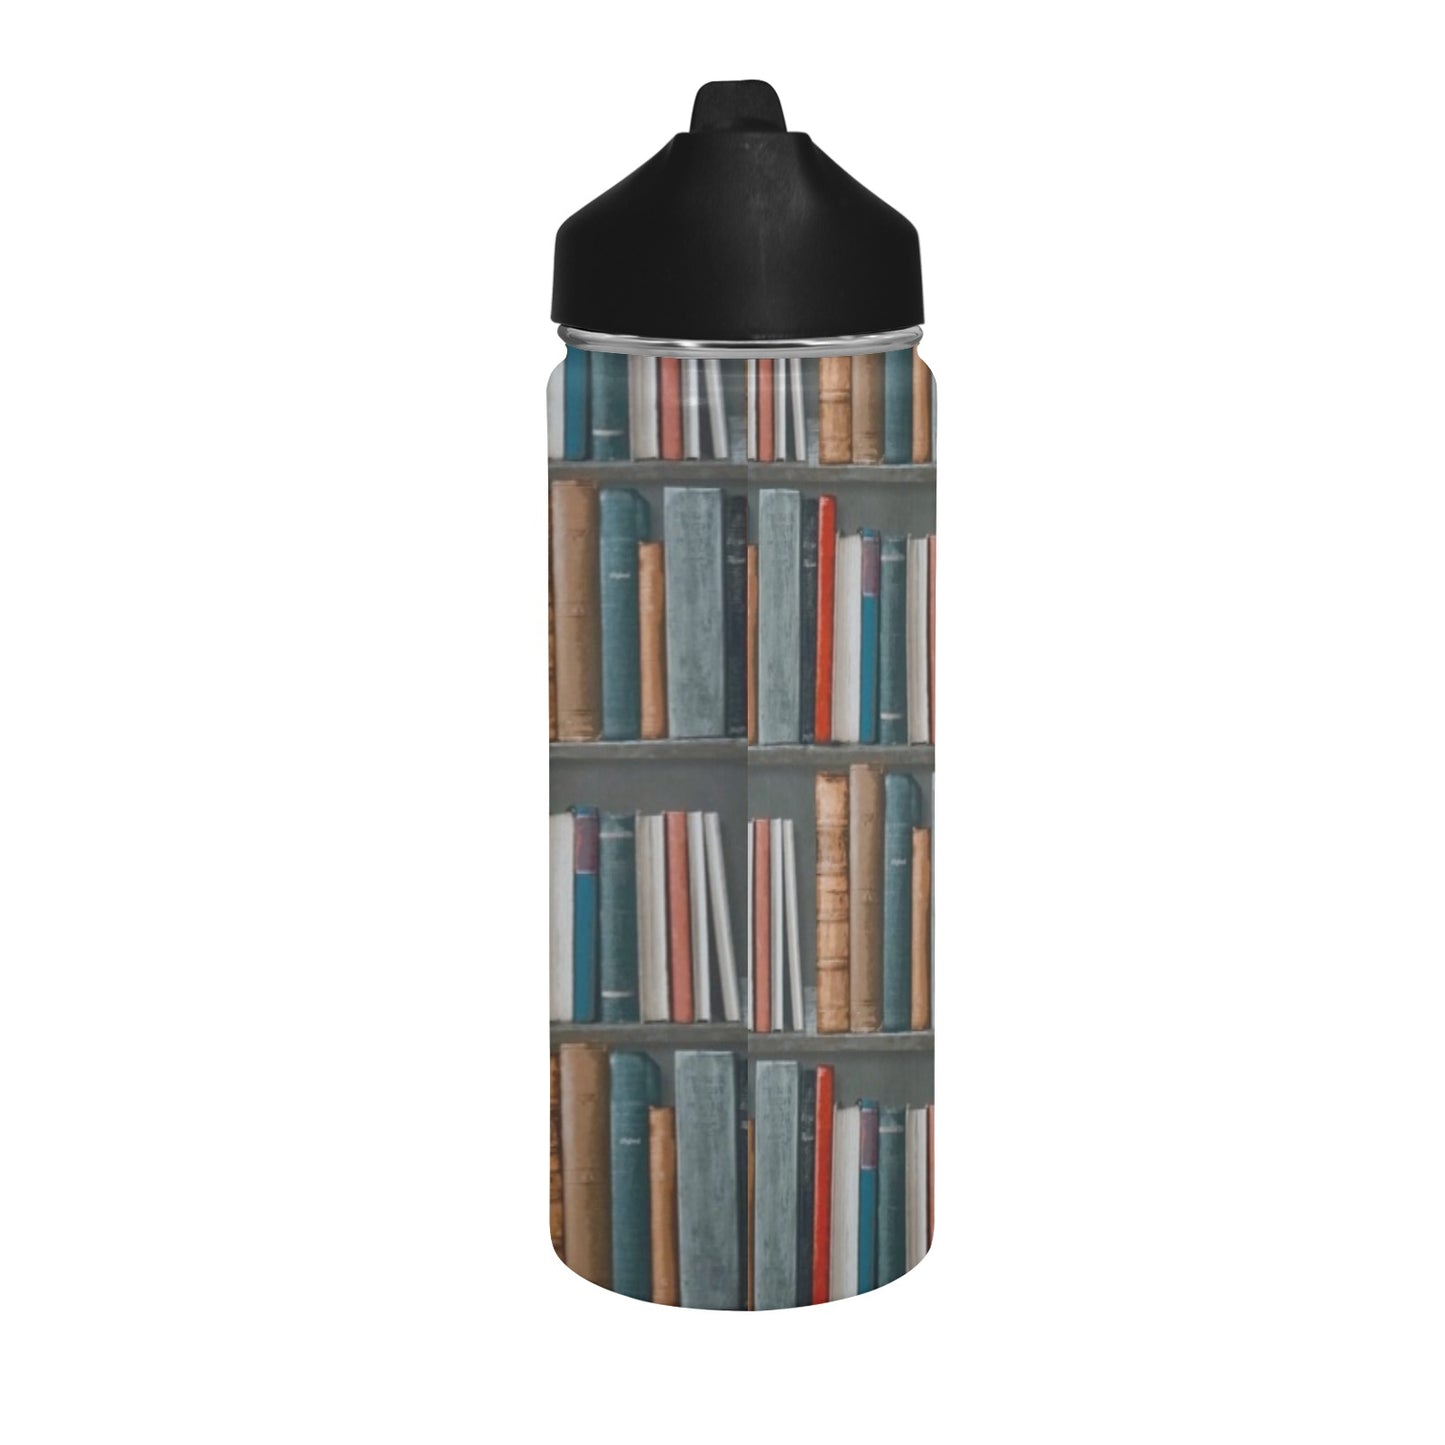 Books Insulated Water Bottle with Straw Lid (18 oz) Insulated Water Bottle with Straw Lid